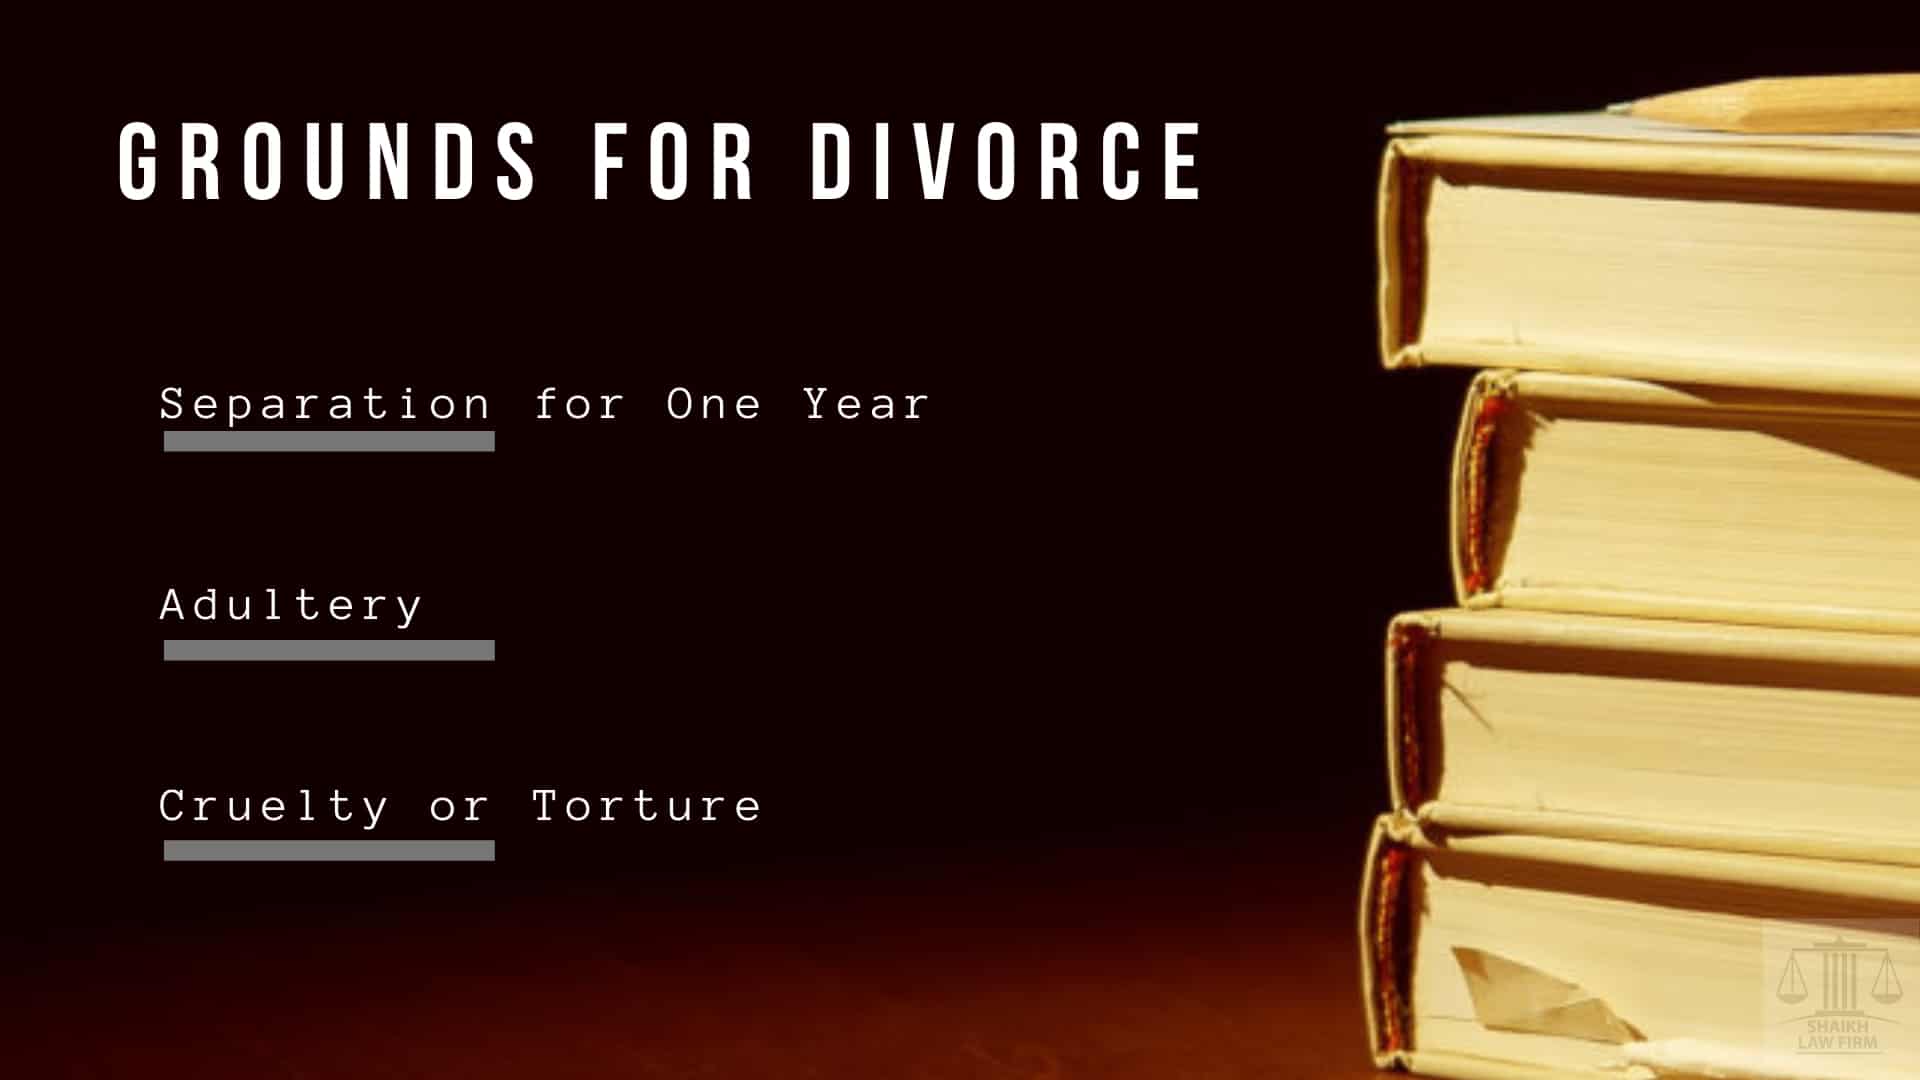 Grounds for Divorce in Ontario Canada